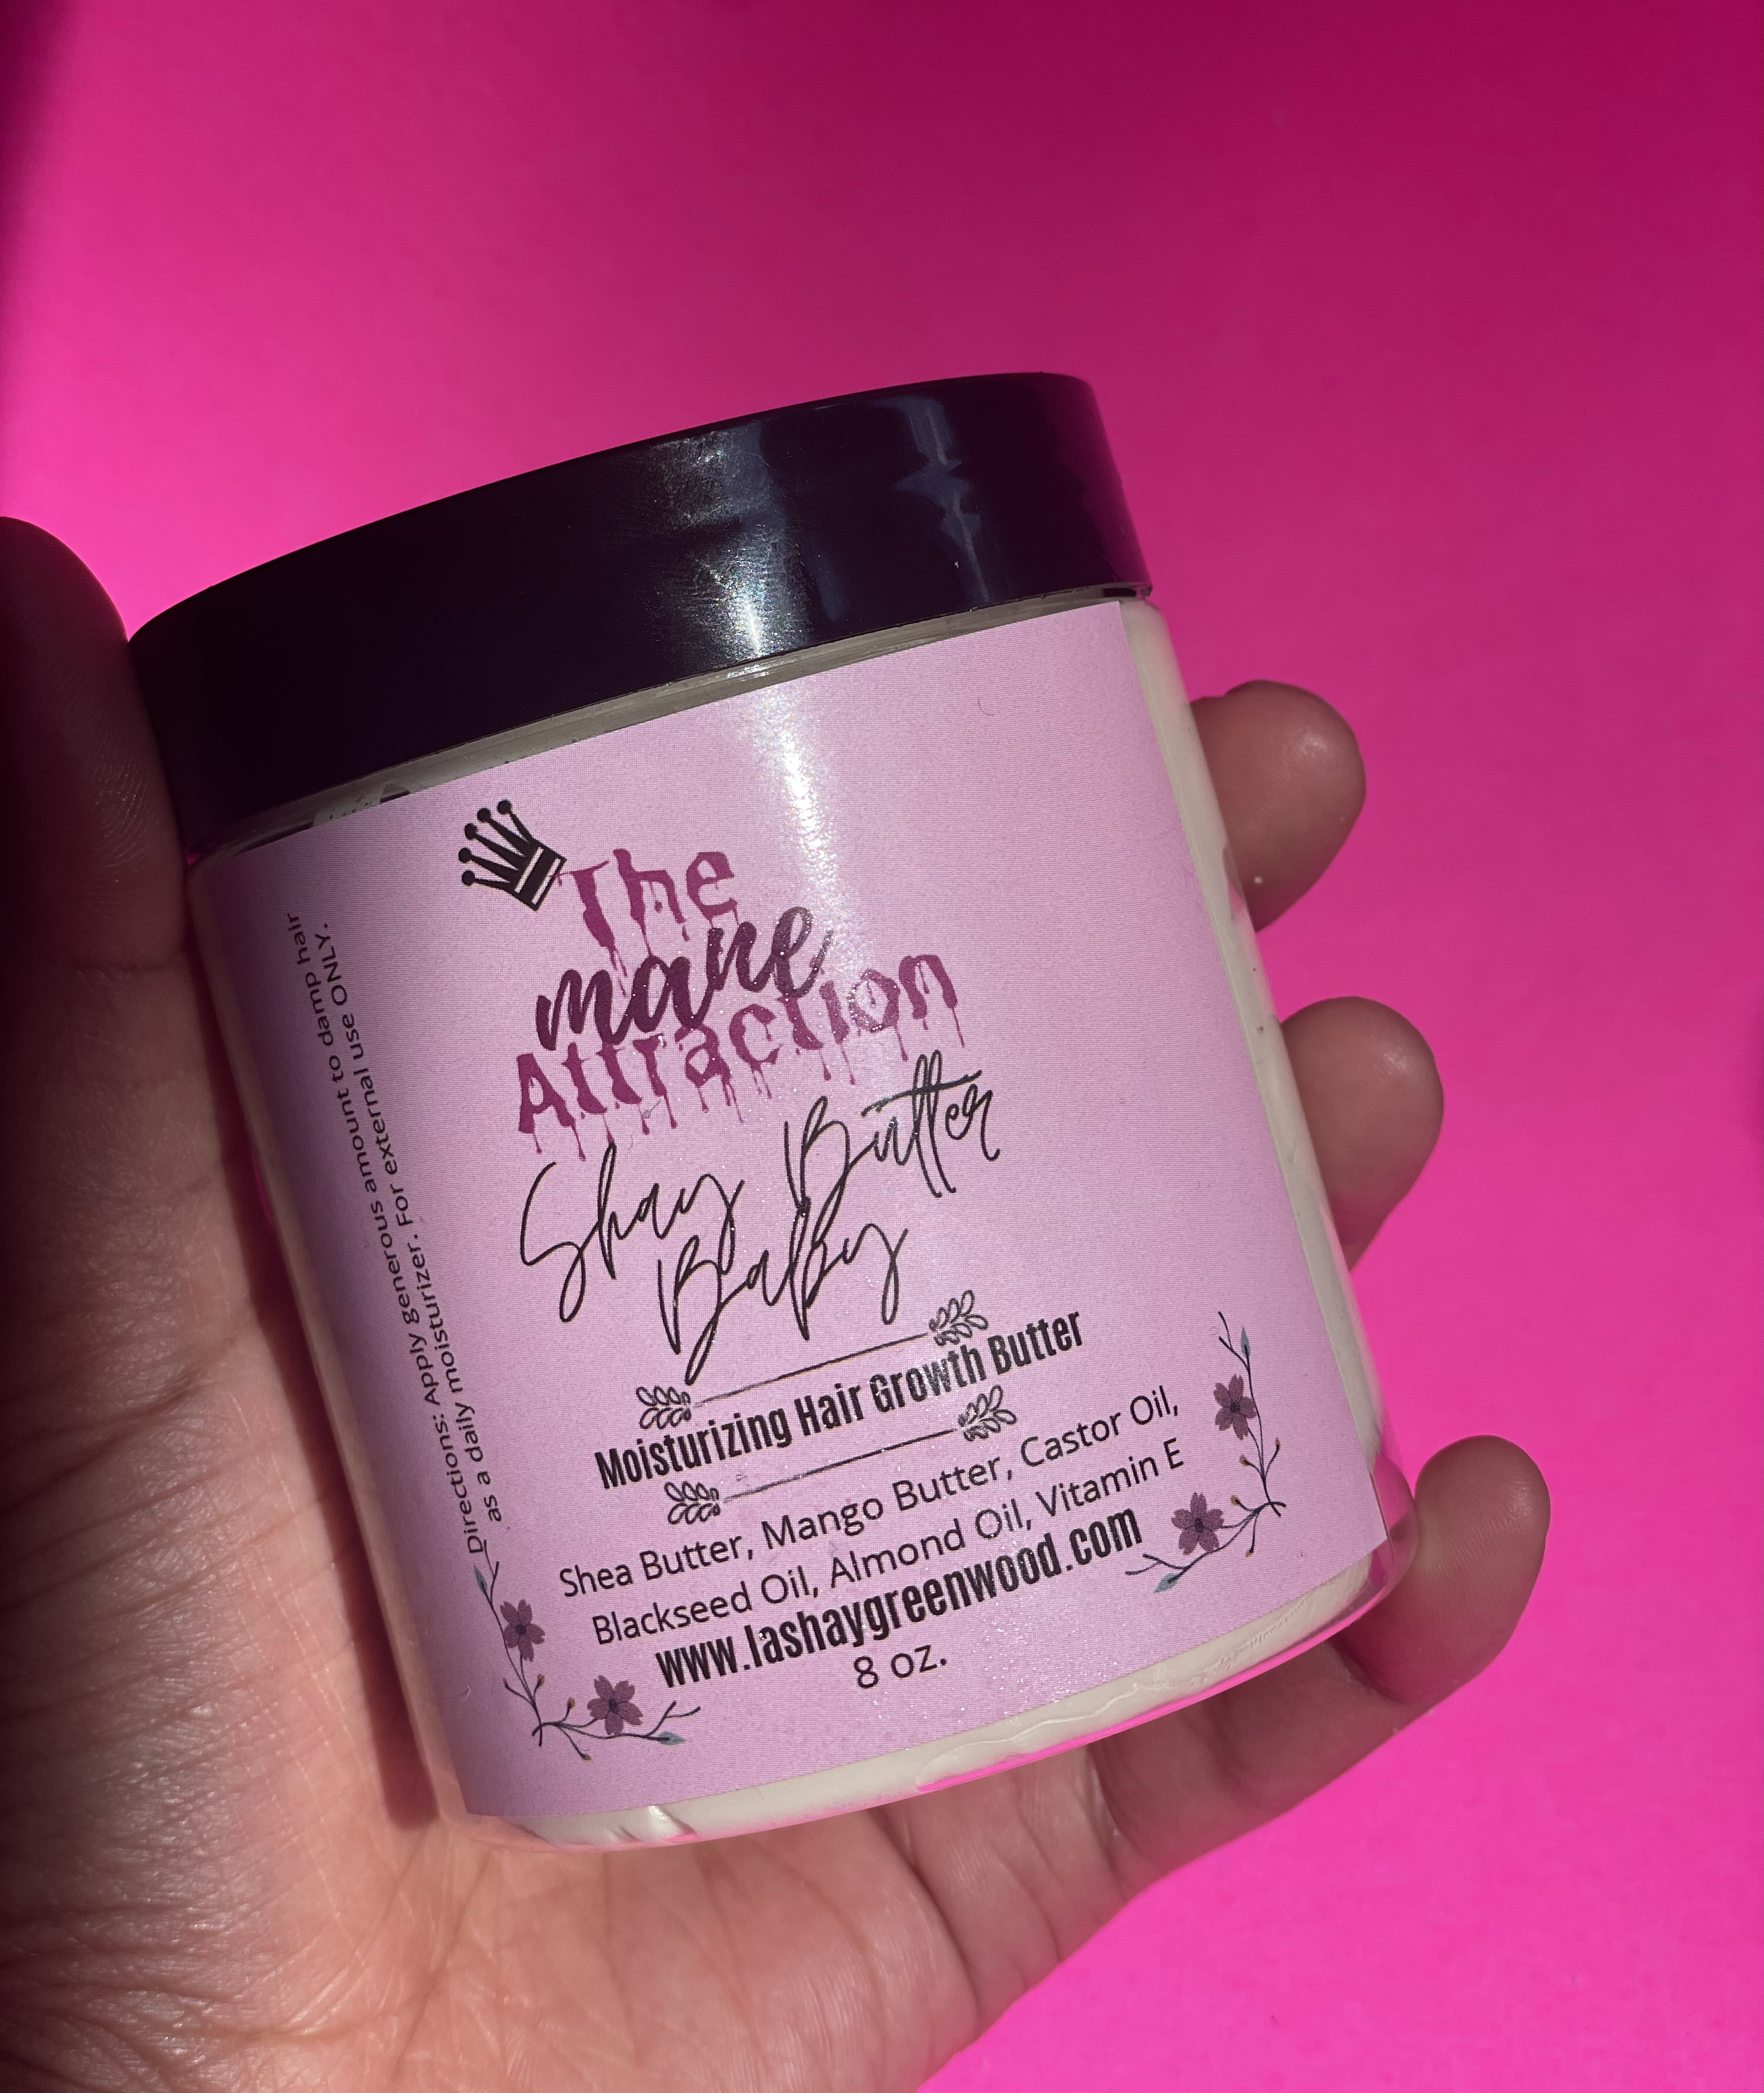 Shay Butter Baby Moisturizing Hair Growth Butter - The Mane Attraction